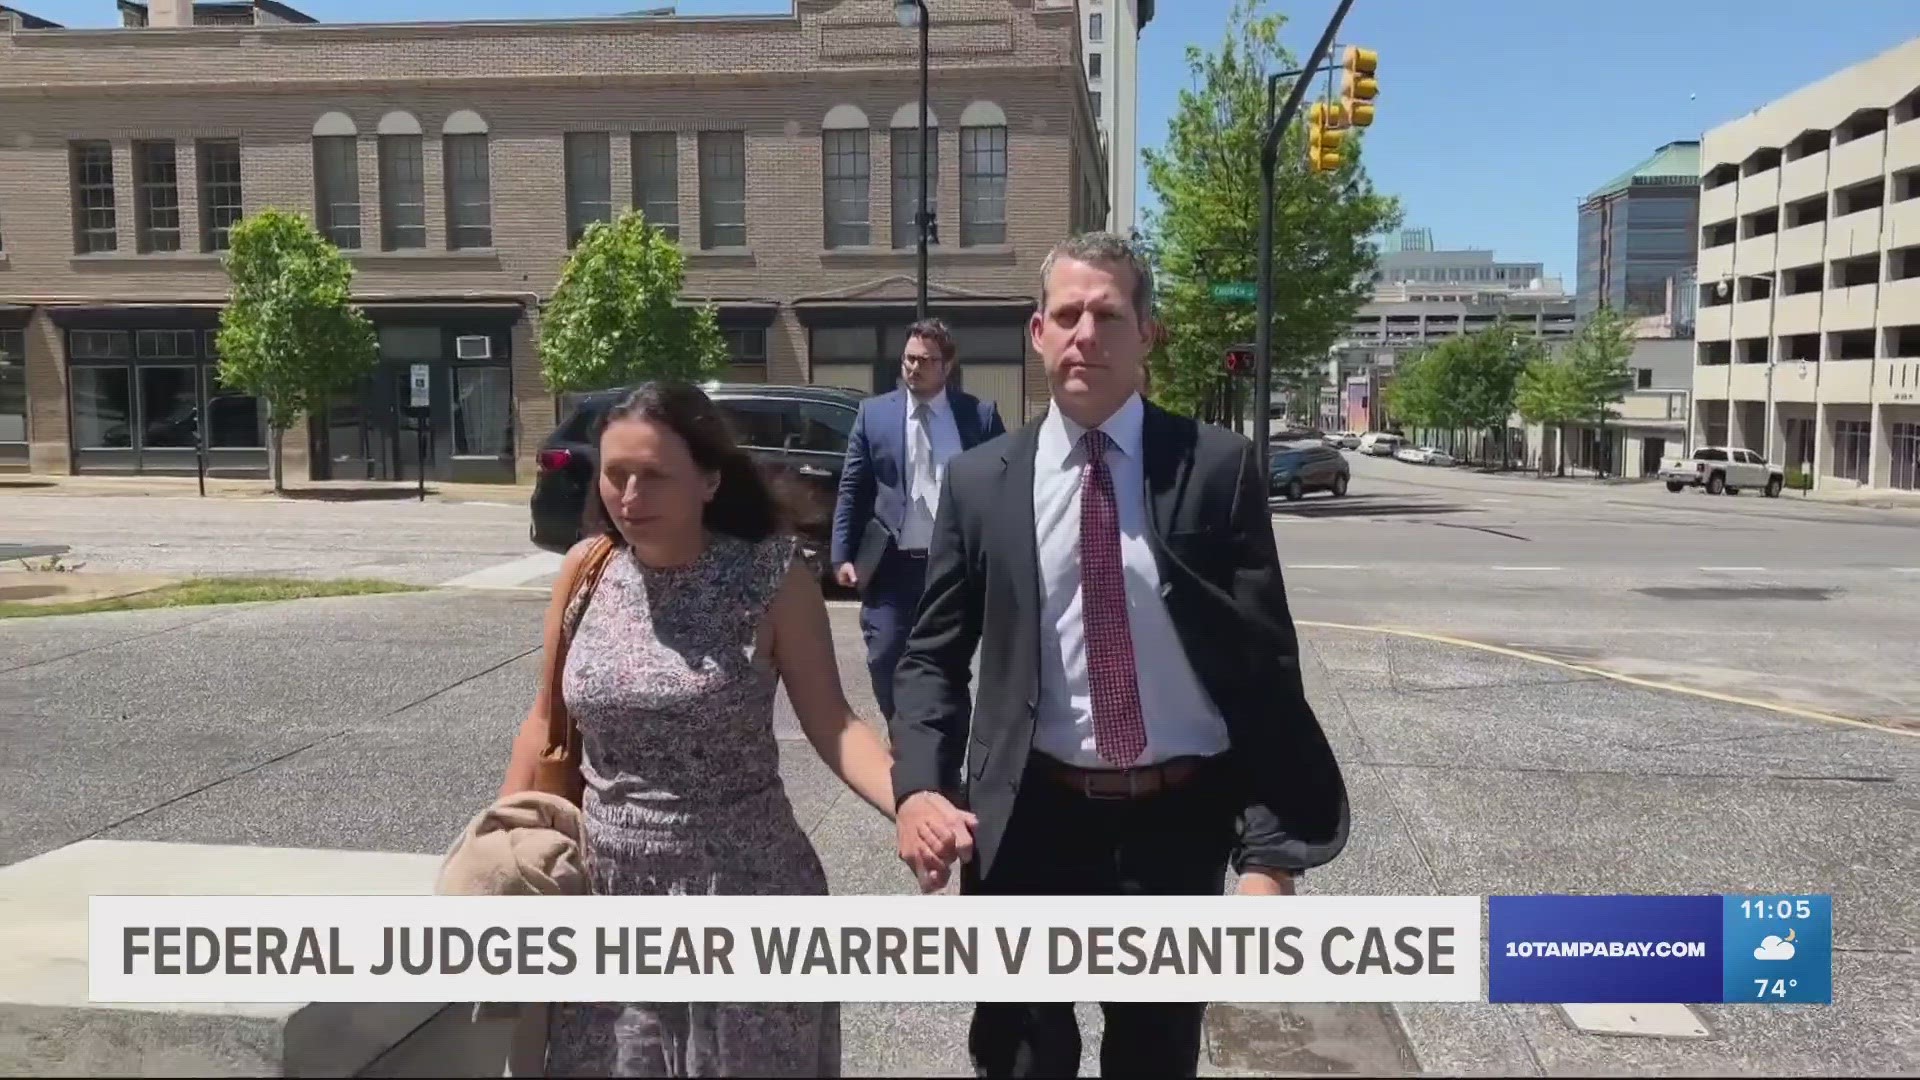 Tuesday afternoon, federal judges heard from Andrew Warren's attorney as well as Governor Ron DeSantis's legal team.